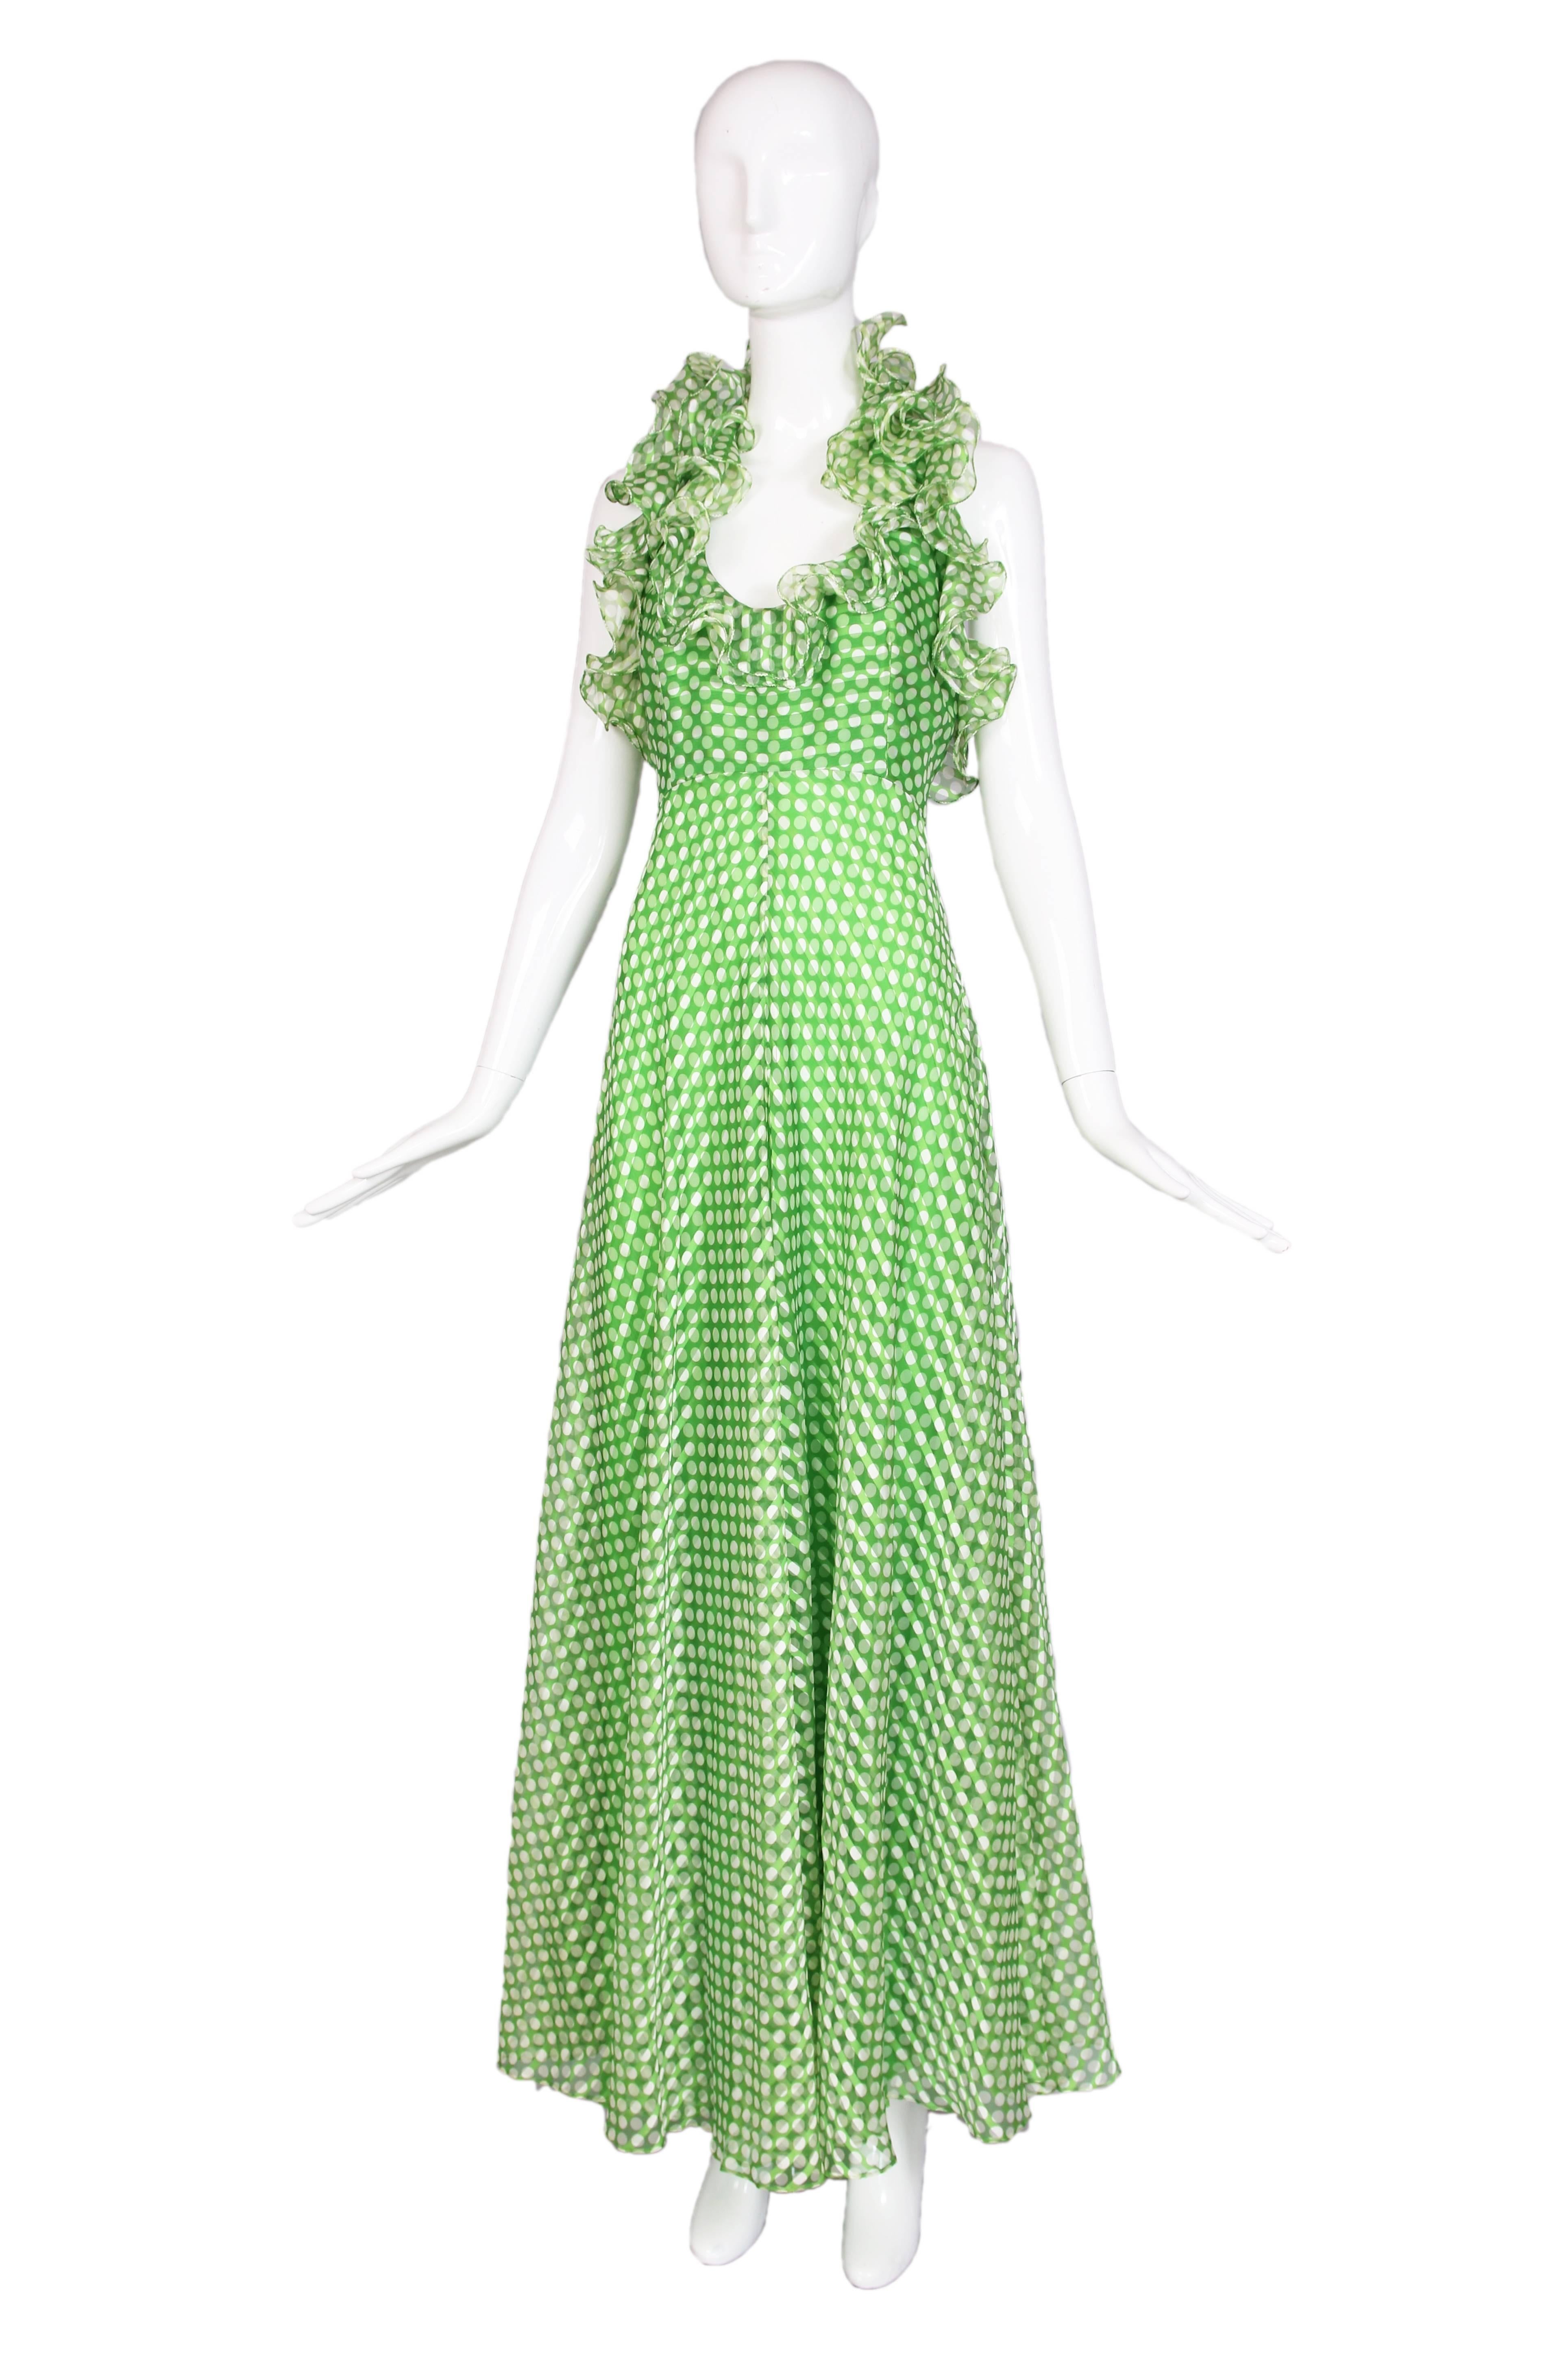 1970's Geoffrey Beene green & white polka dot halter dress featuring ruffled trim. Fully lined. In excellent condition. No size tag, please consult measurements.
MEASUREMENTS:
Bust - 33